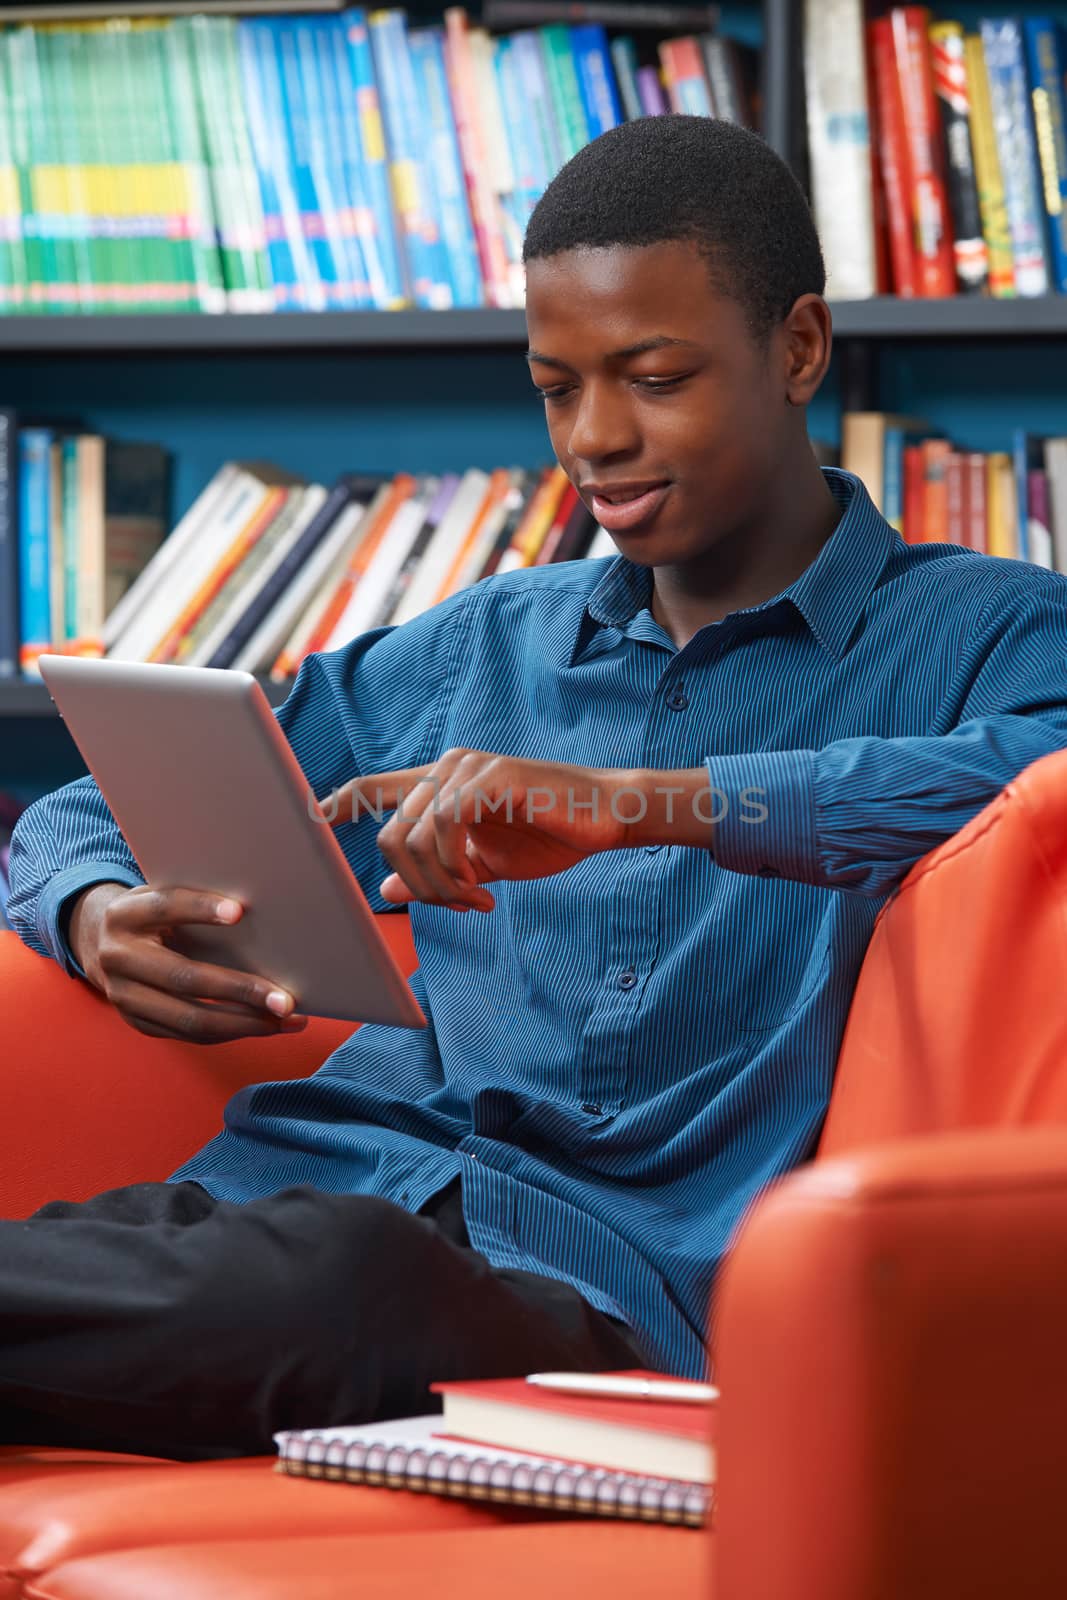 Male Teenage Student Using Digital Tablet In Library by HWS